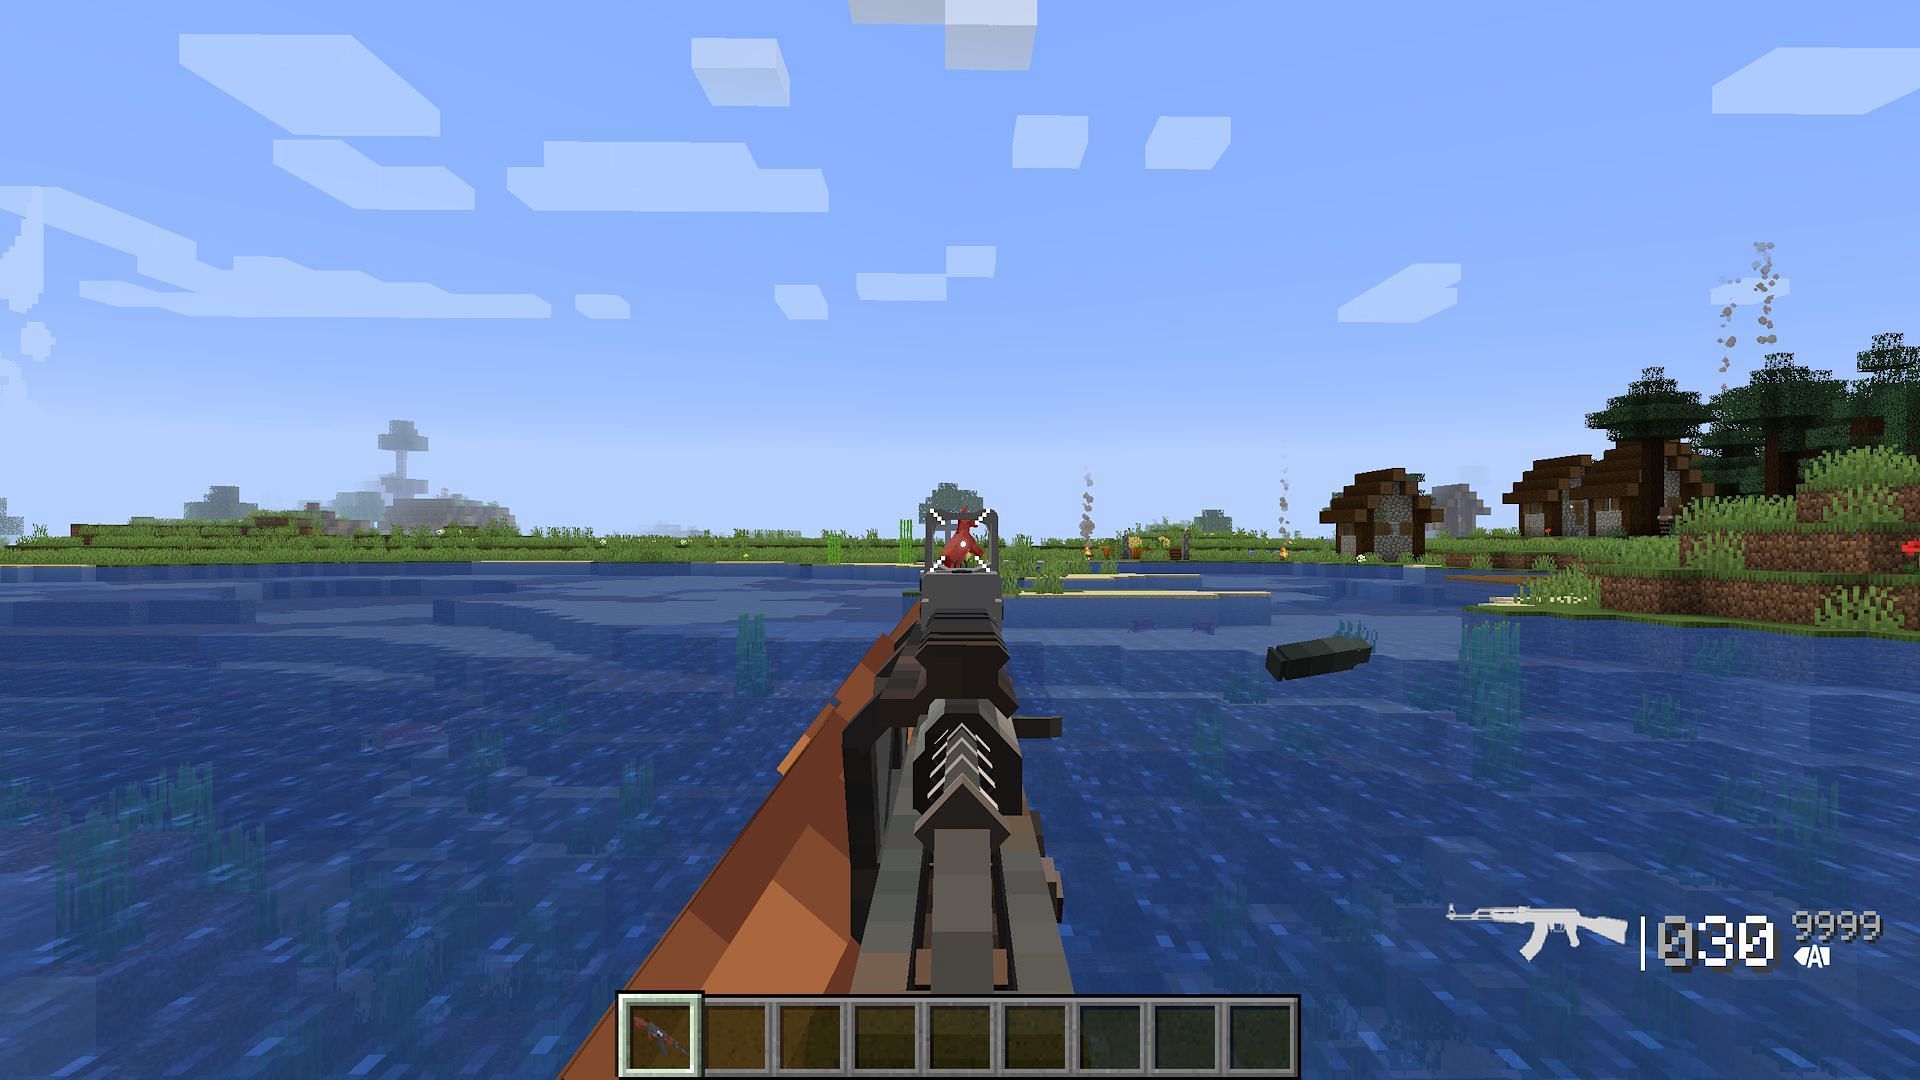 These Minecraft gun mods are sure to spice up any server war (Image via Mojang)